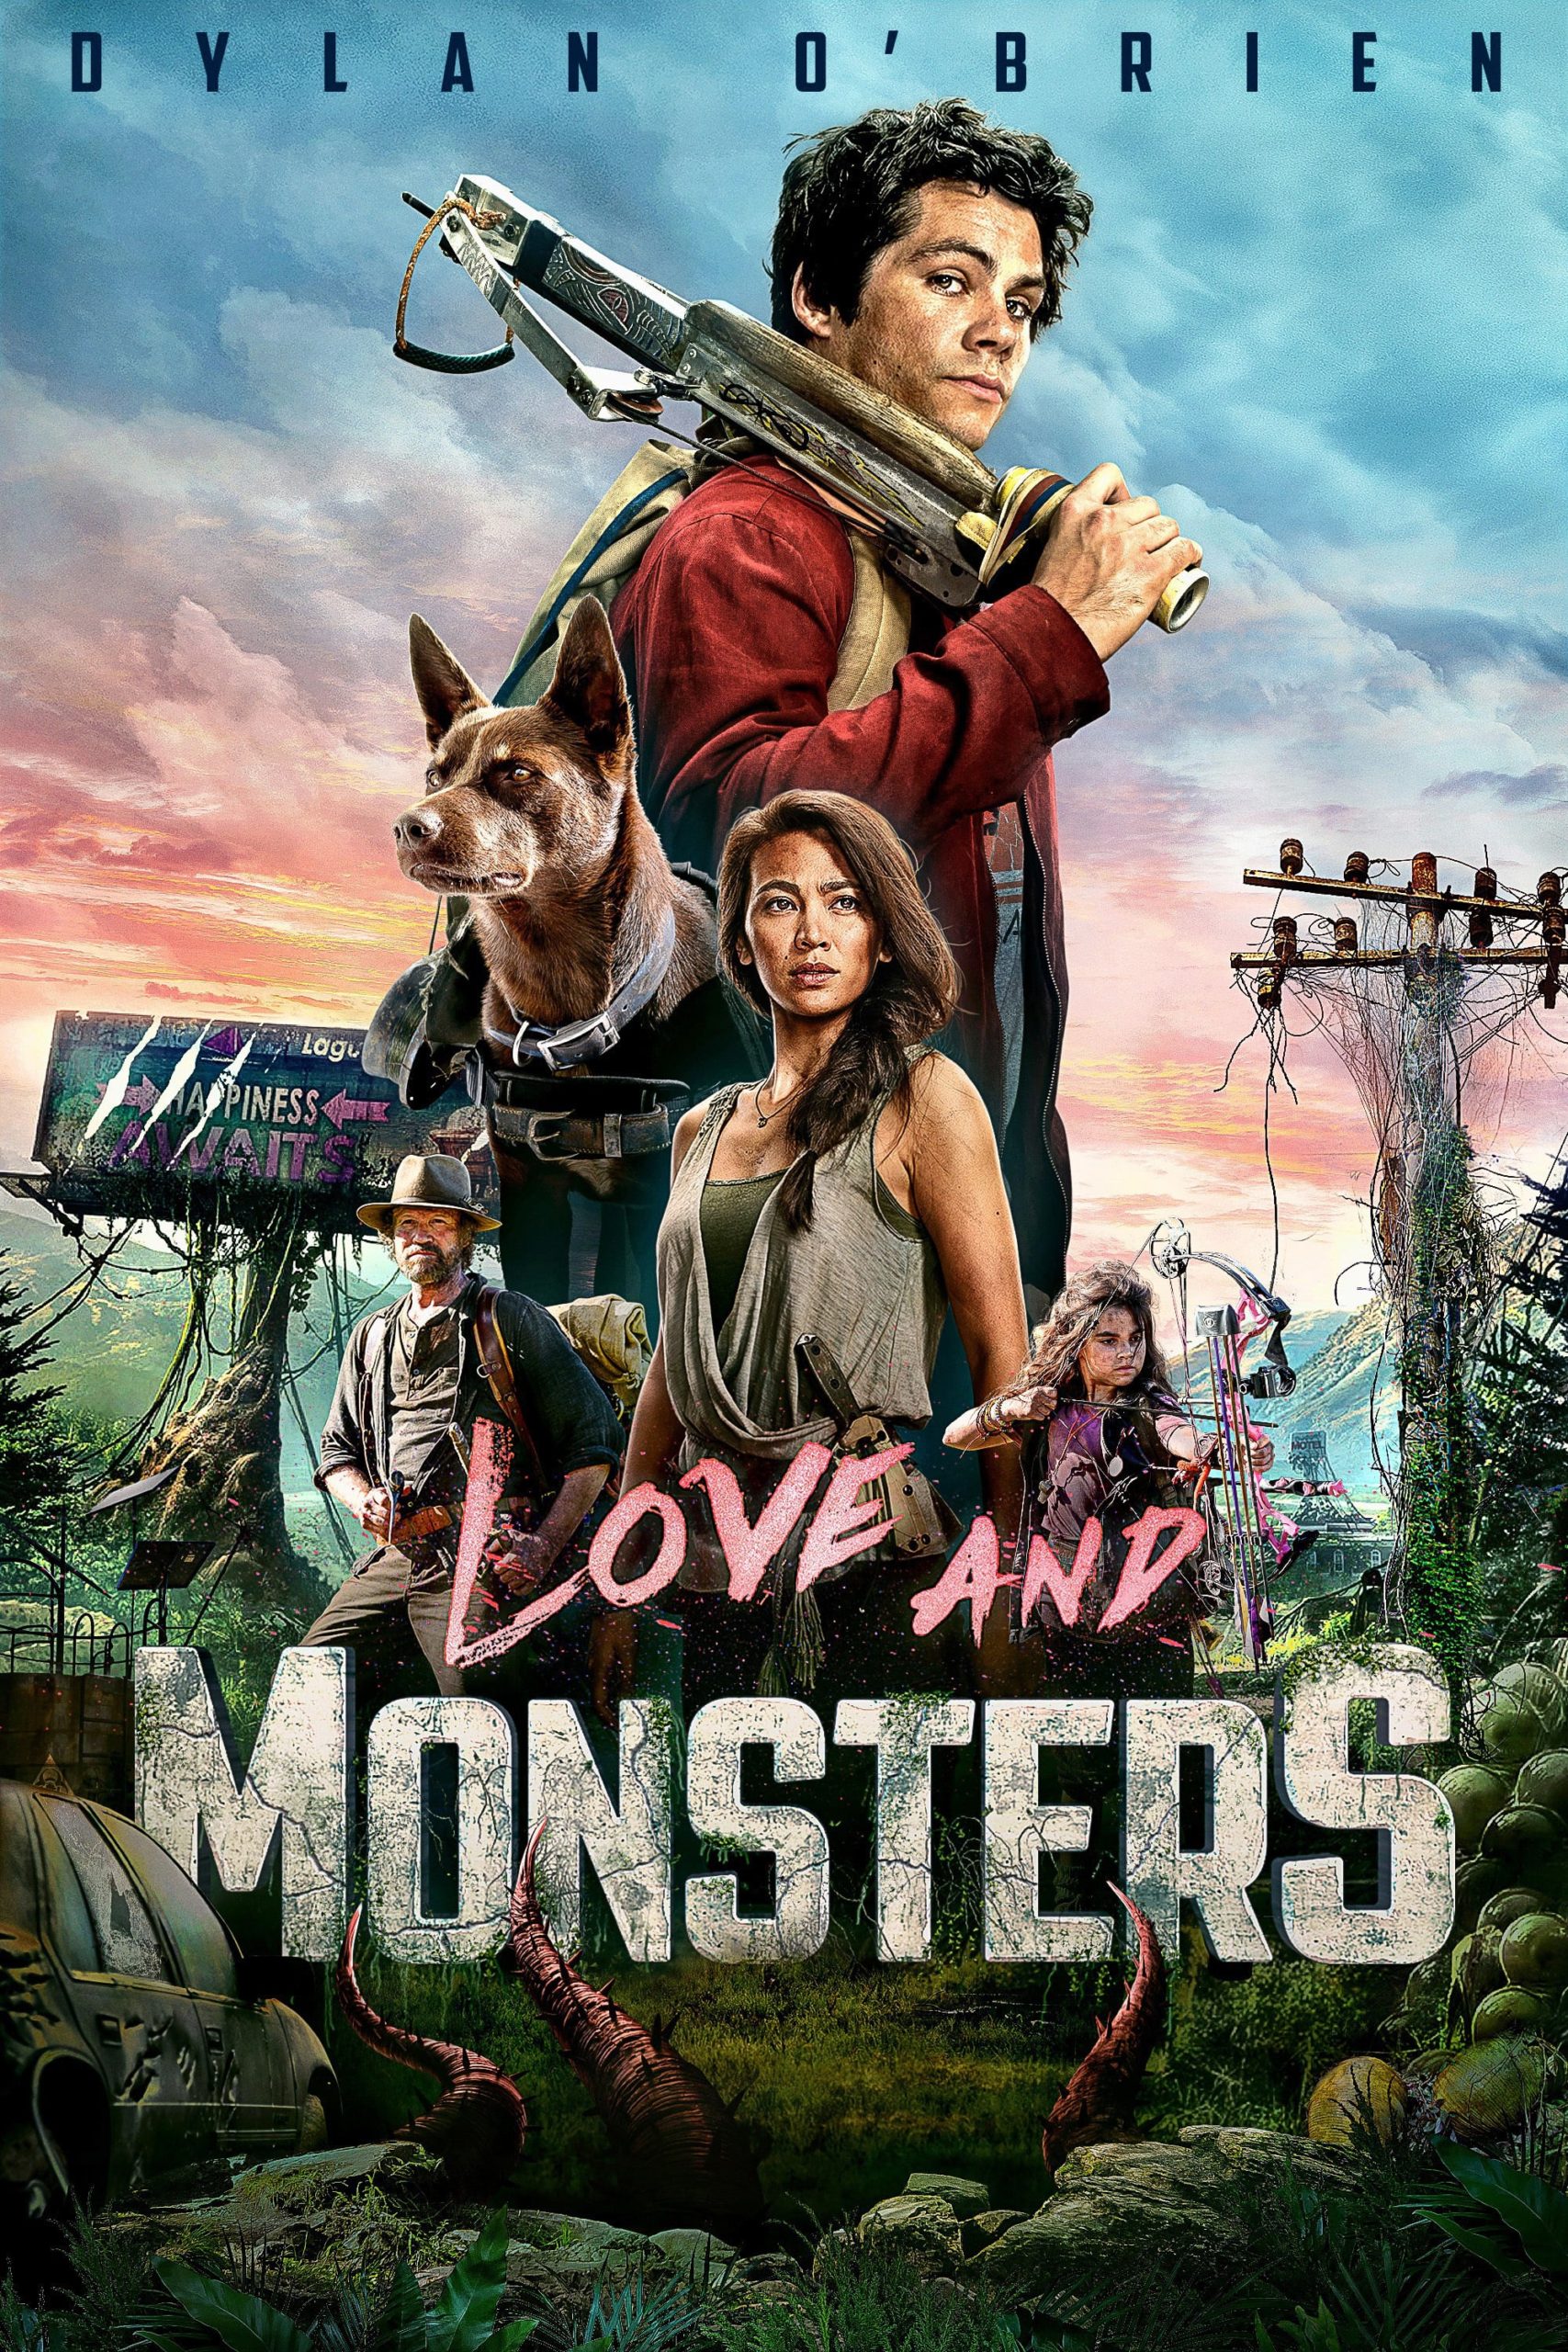 other monsters movie review